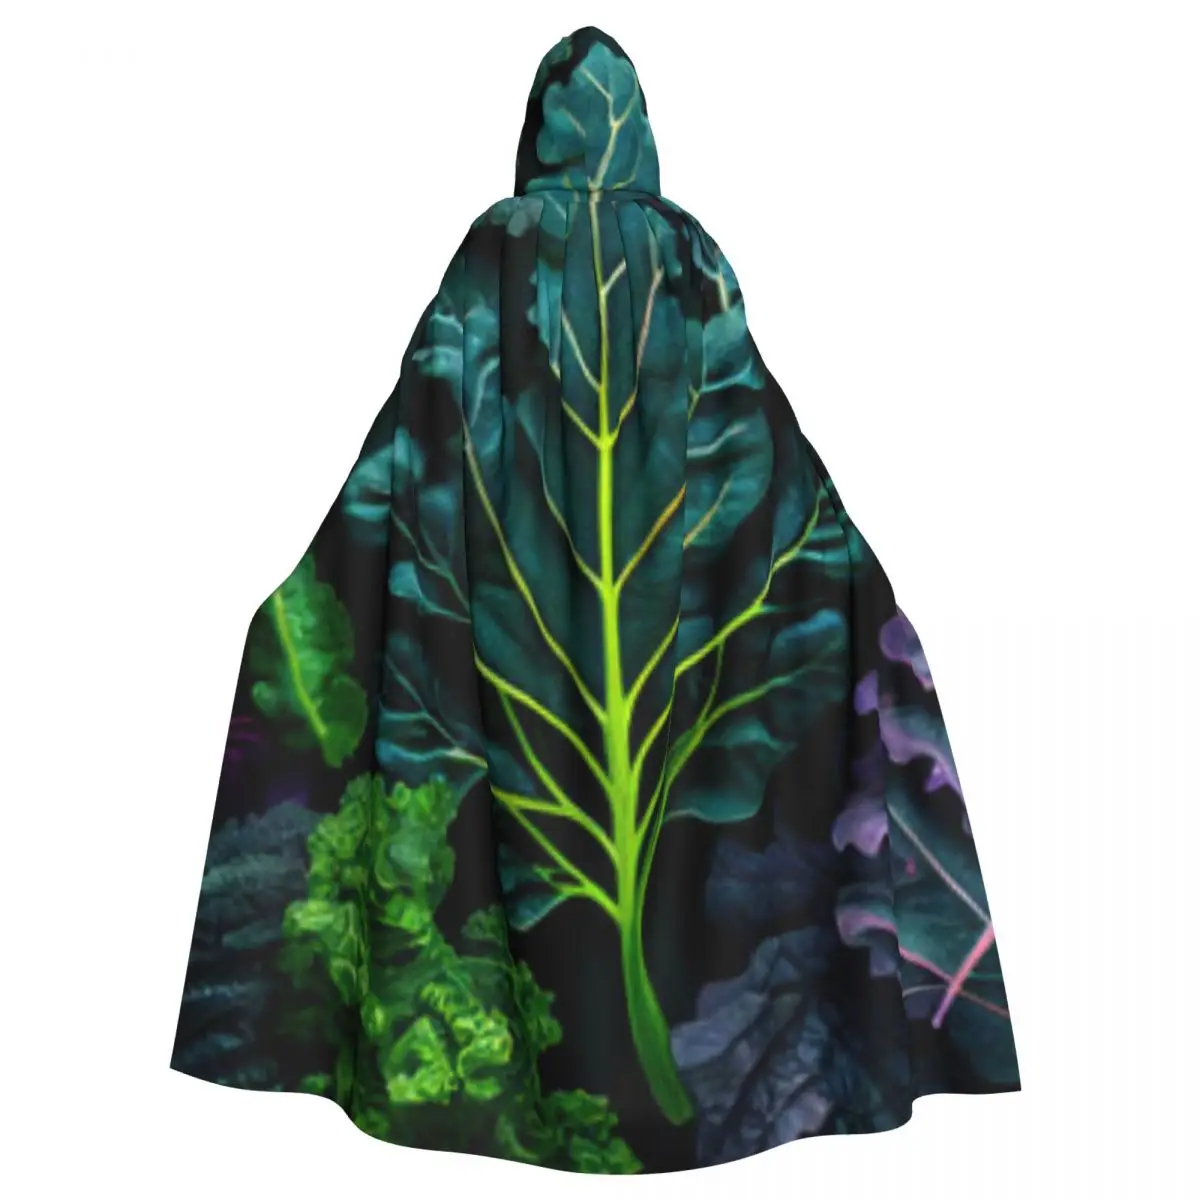 

Kale Cabbage Hooded Cloak Coat Halloween Cosplay Costume Vampire Devil Wizard Cape Gown Party